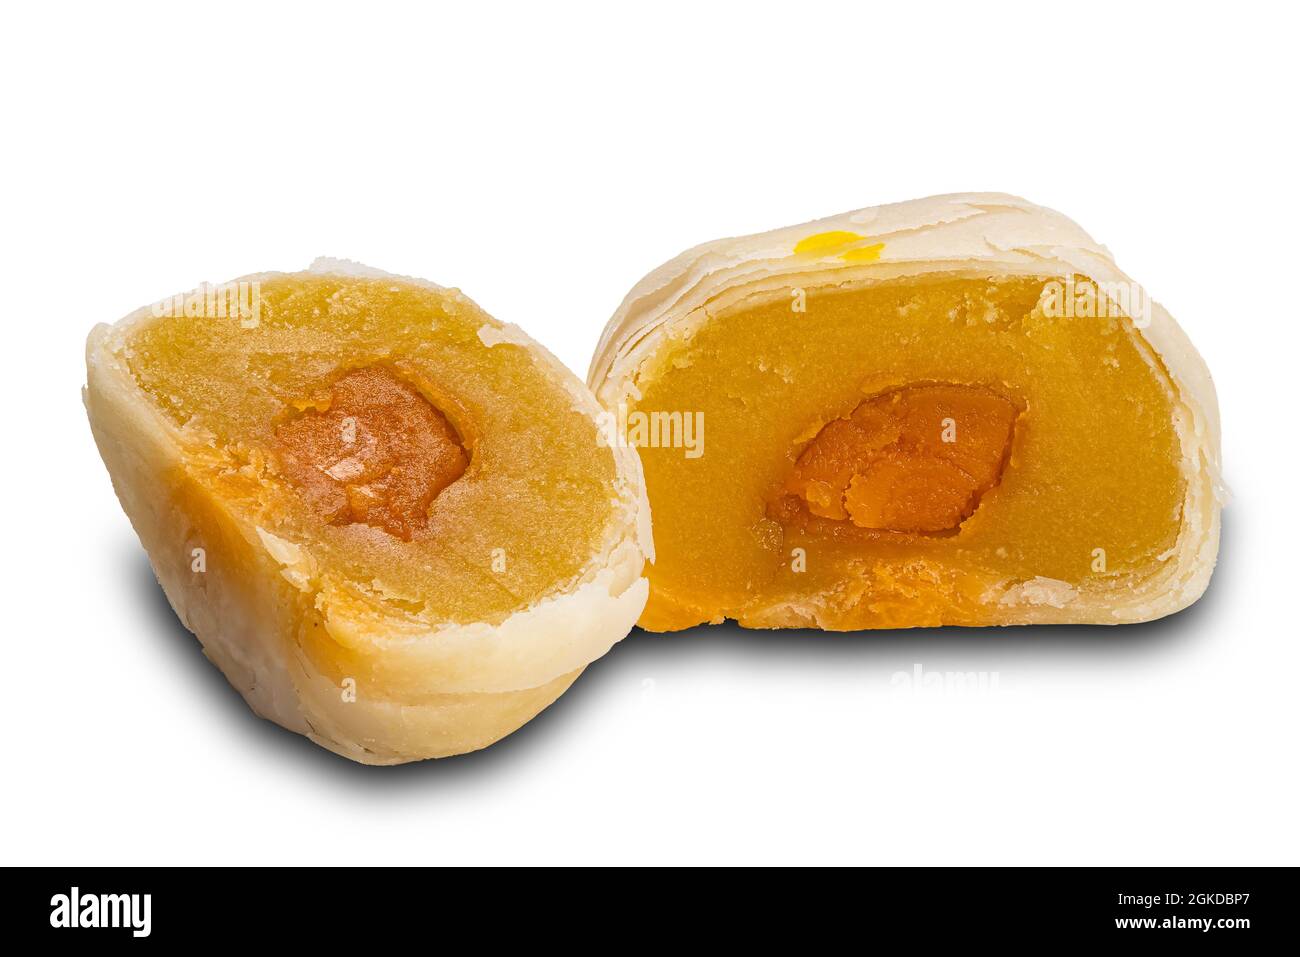 Two halves of chinese patry or moon cake filled with mashed mung bean and salted egg yolk on white background with clipping path. Stock Photo